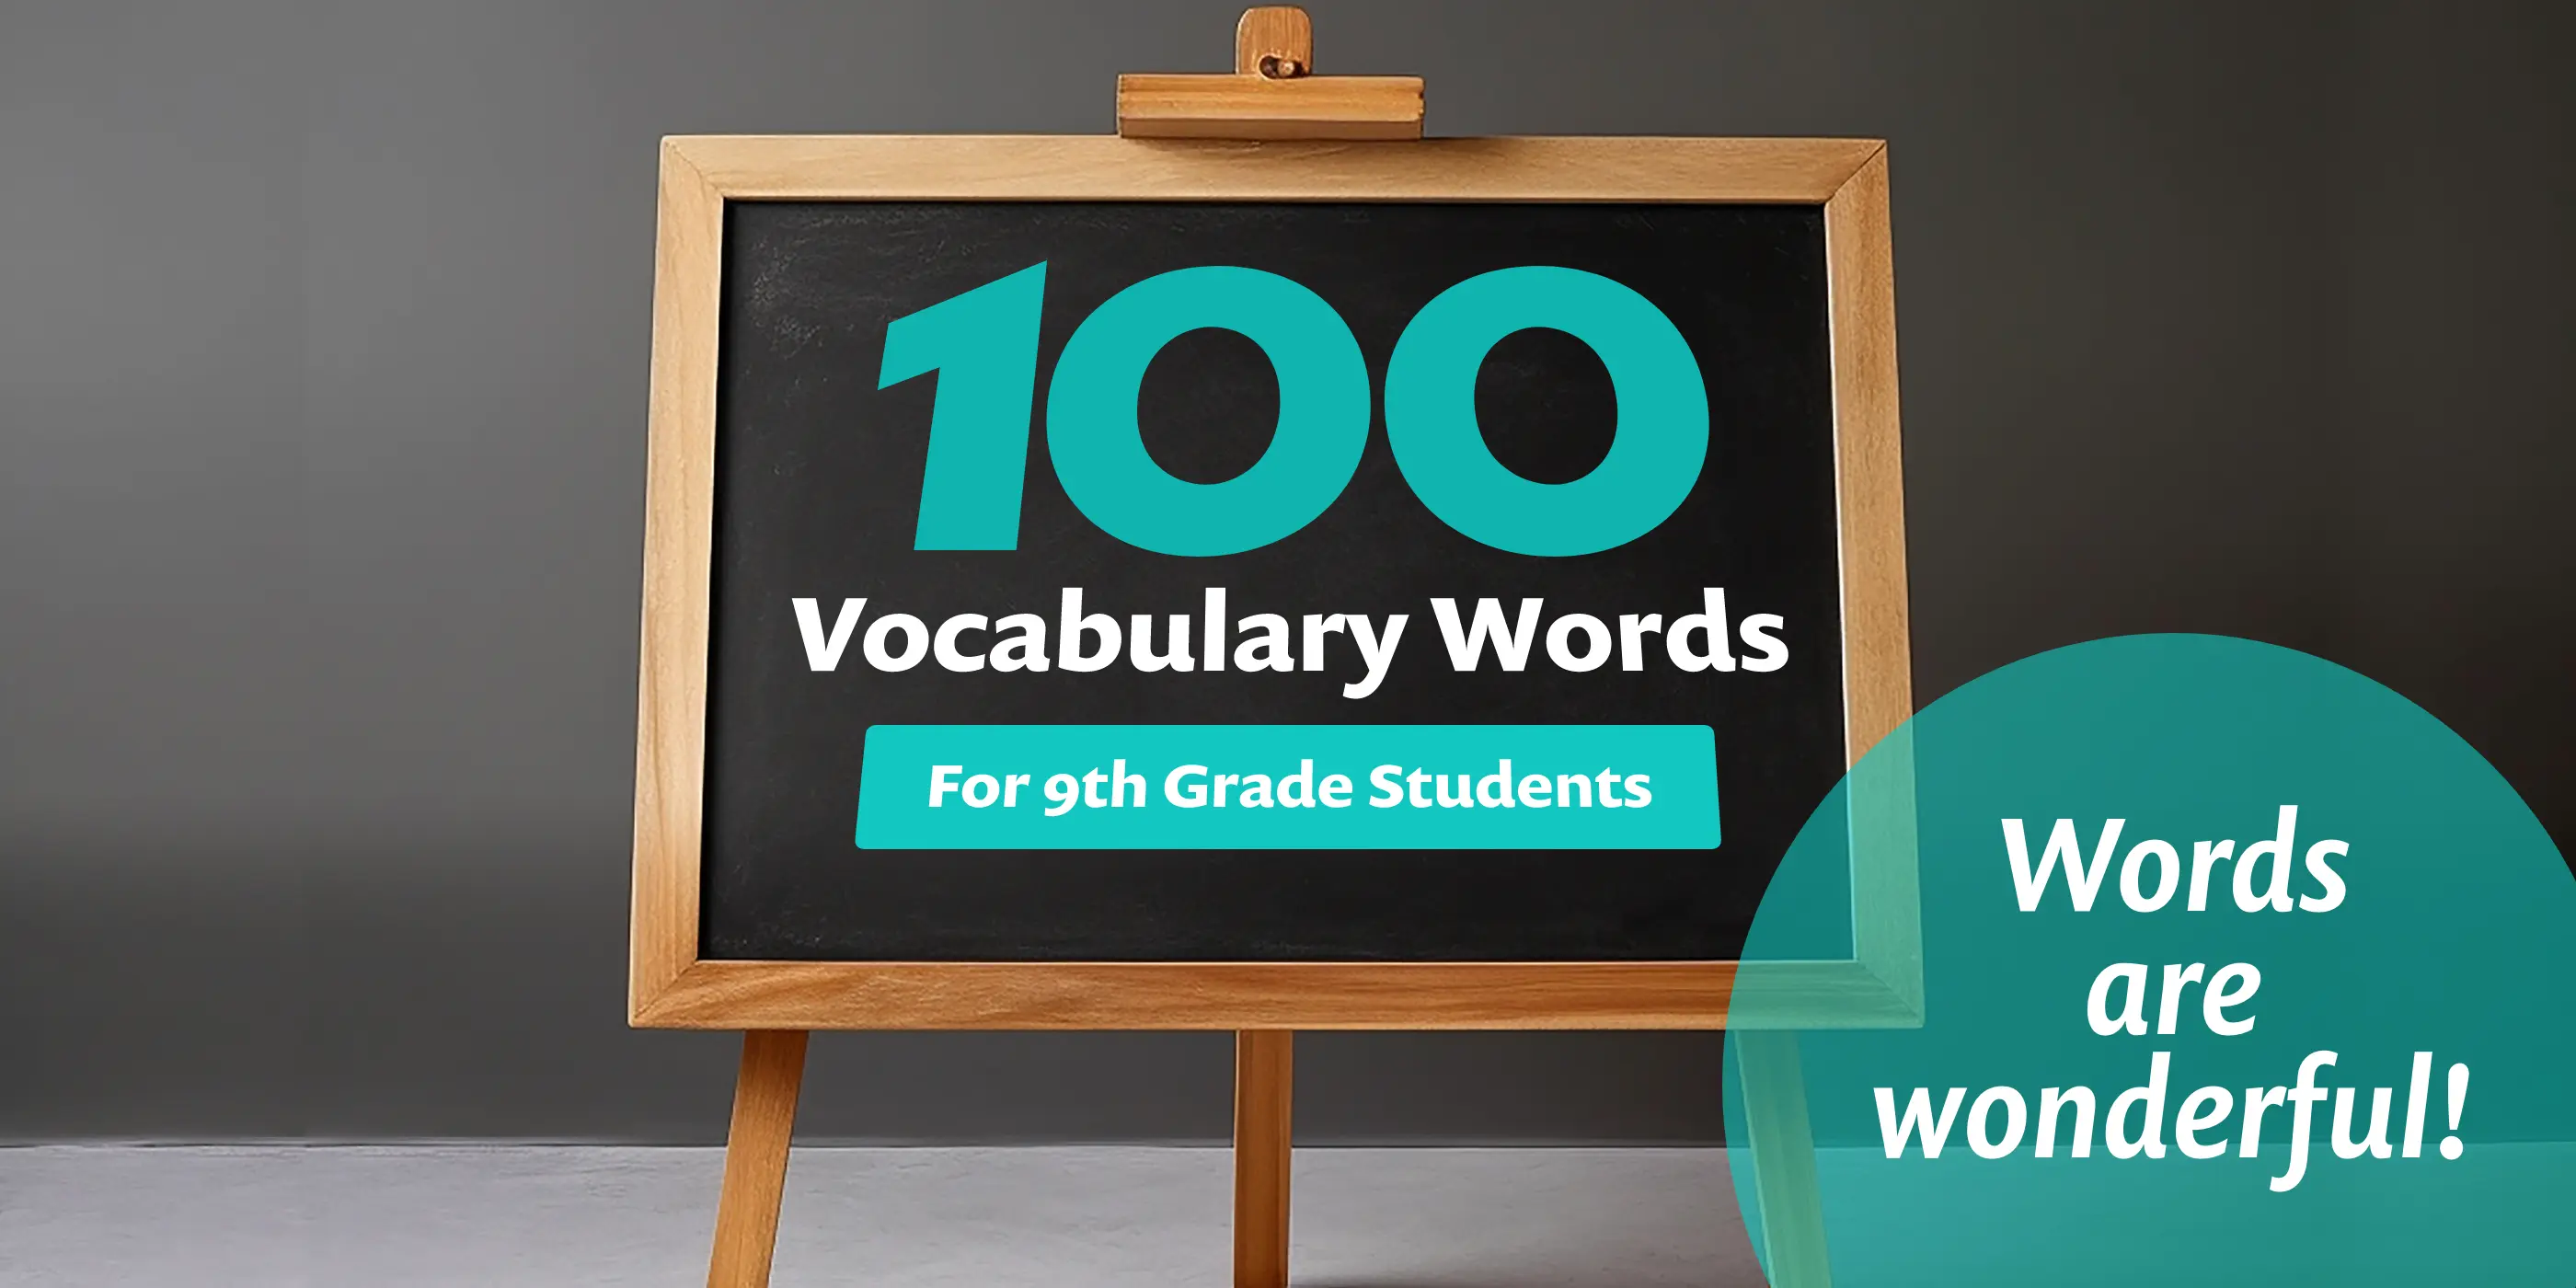 100 Vocabulary Words for 9th Grade Students